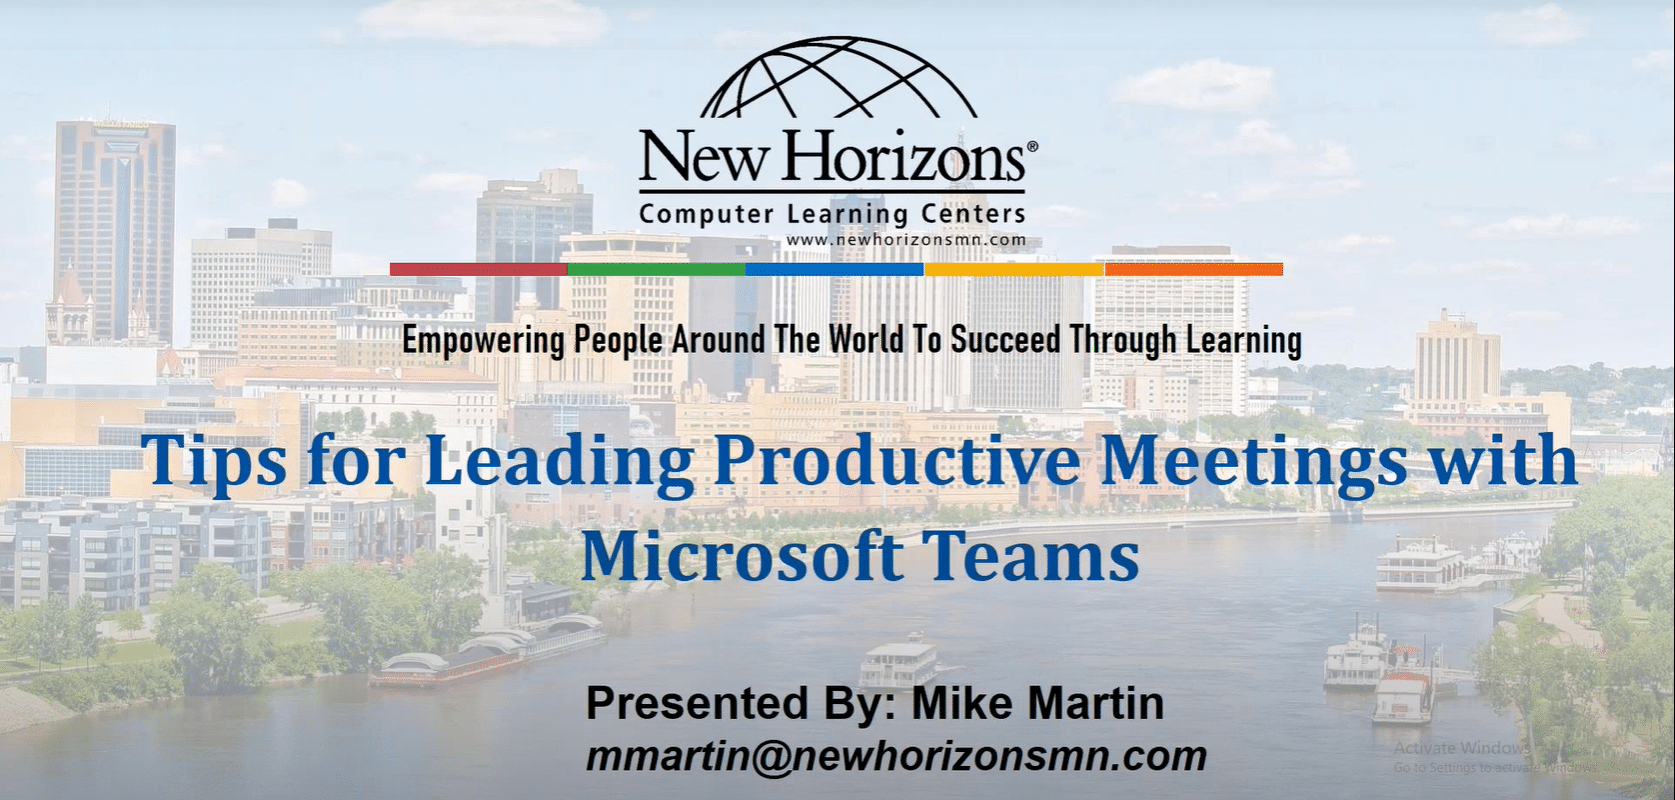 Tips for Leading Productive Meetings with Microsoft Teams